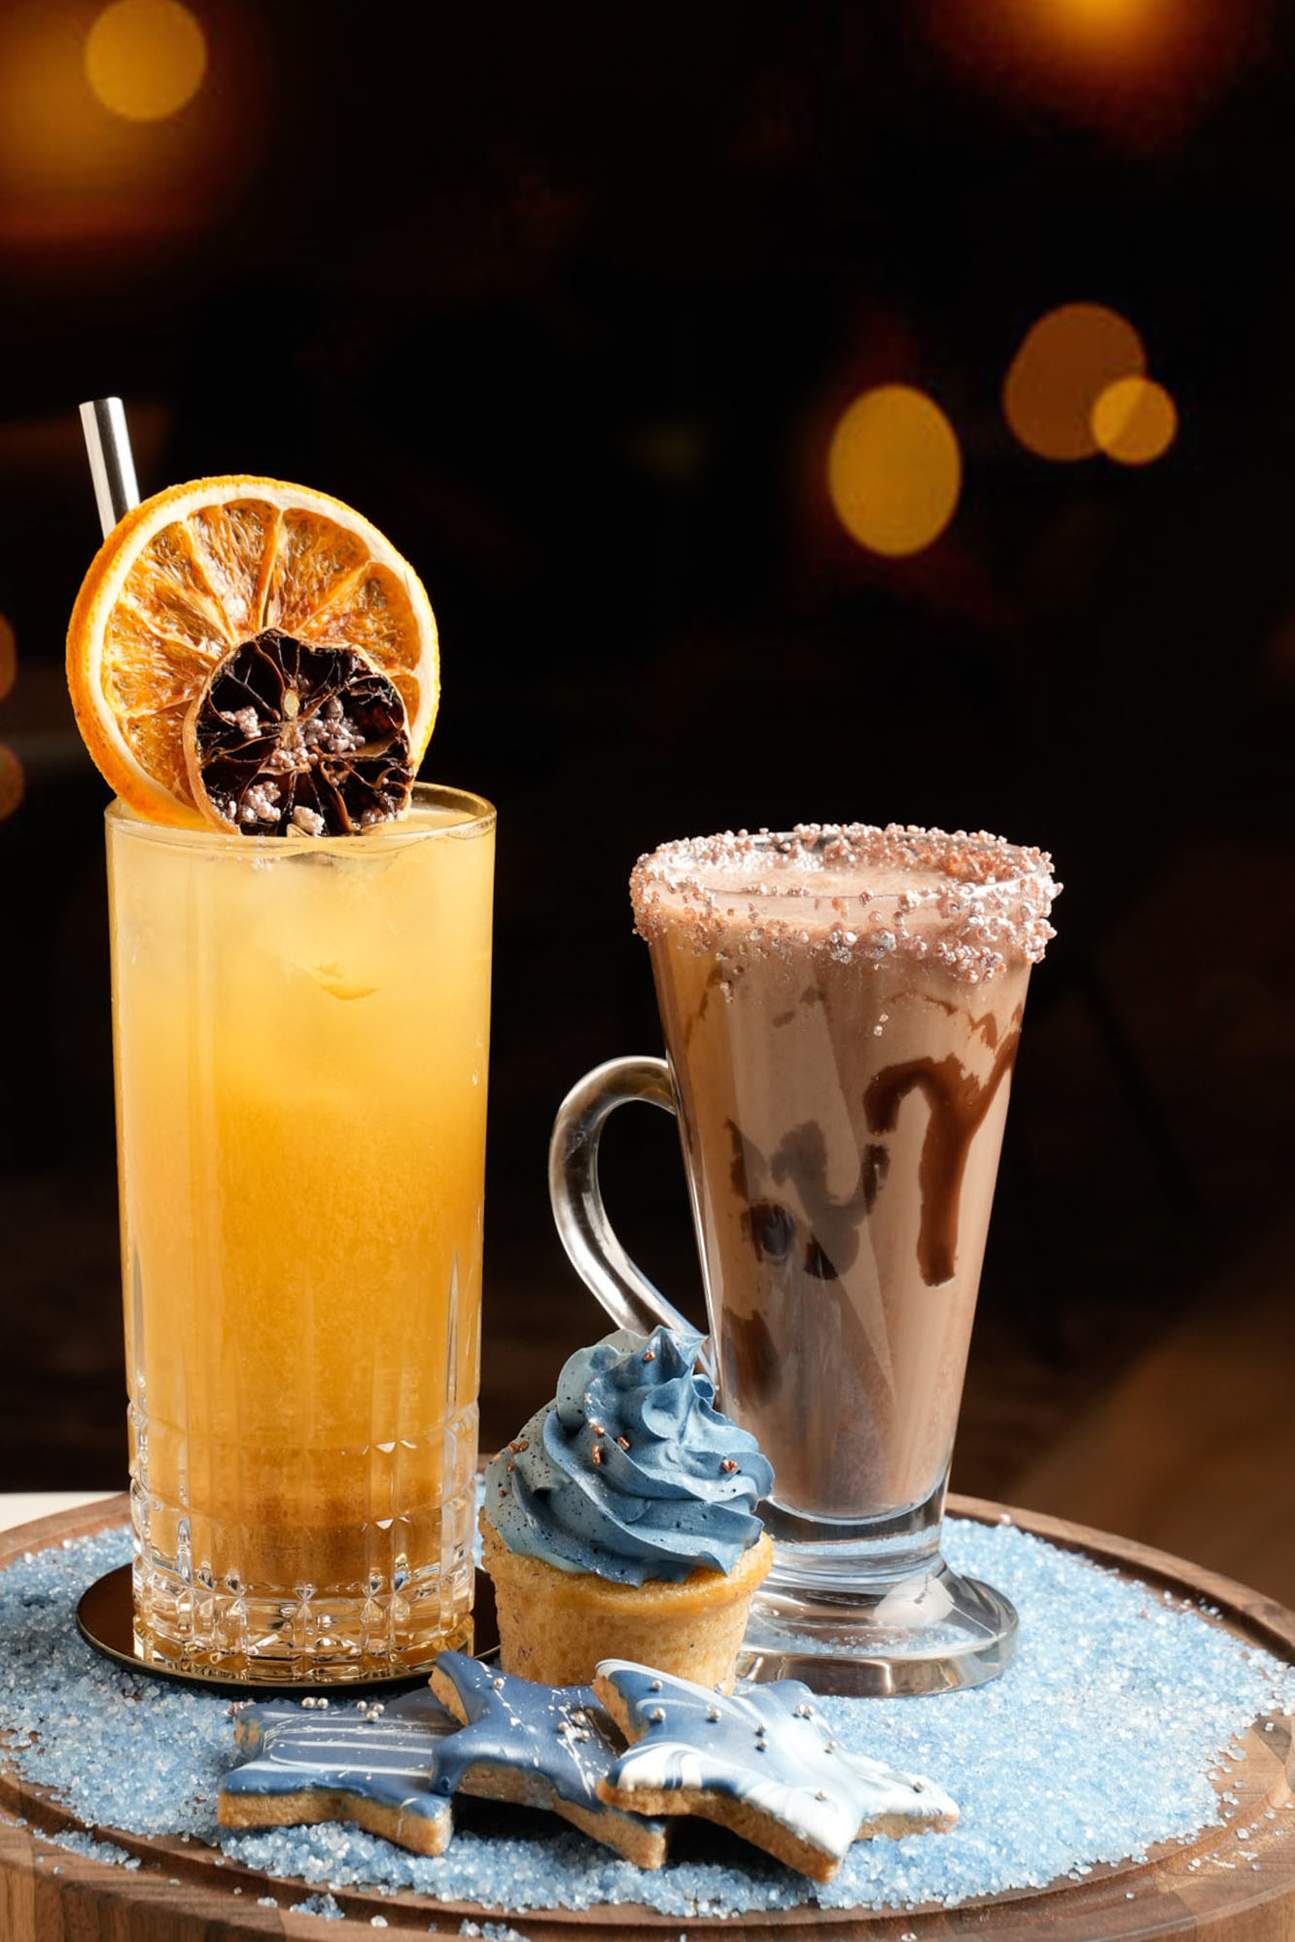 Savour a Signature welcome drink for adults and Mini Milkshake & Cookie or Cupcake for children